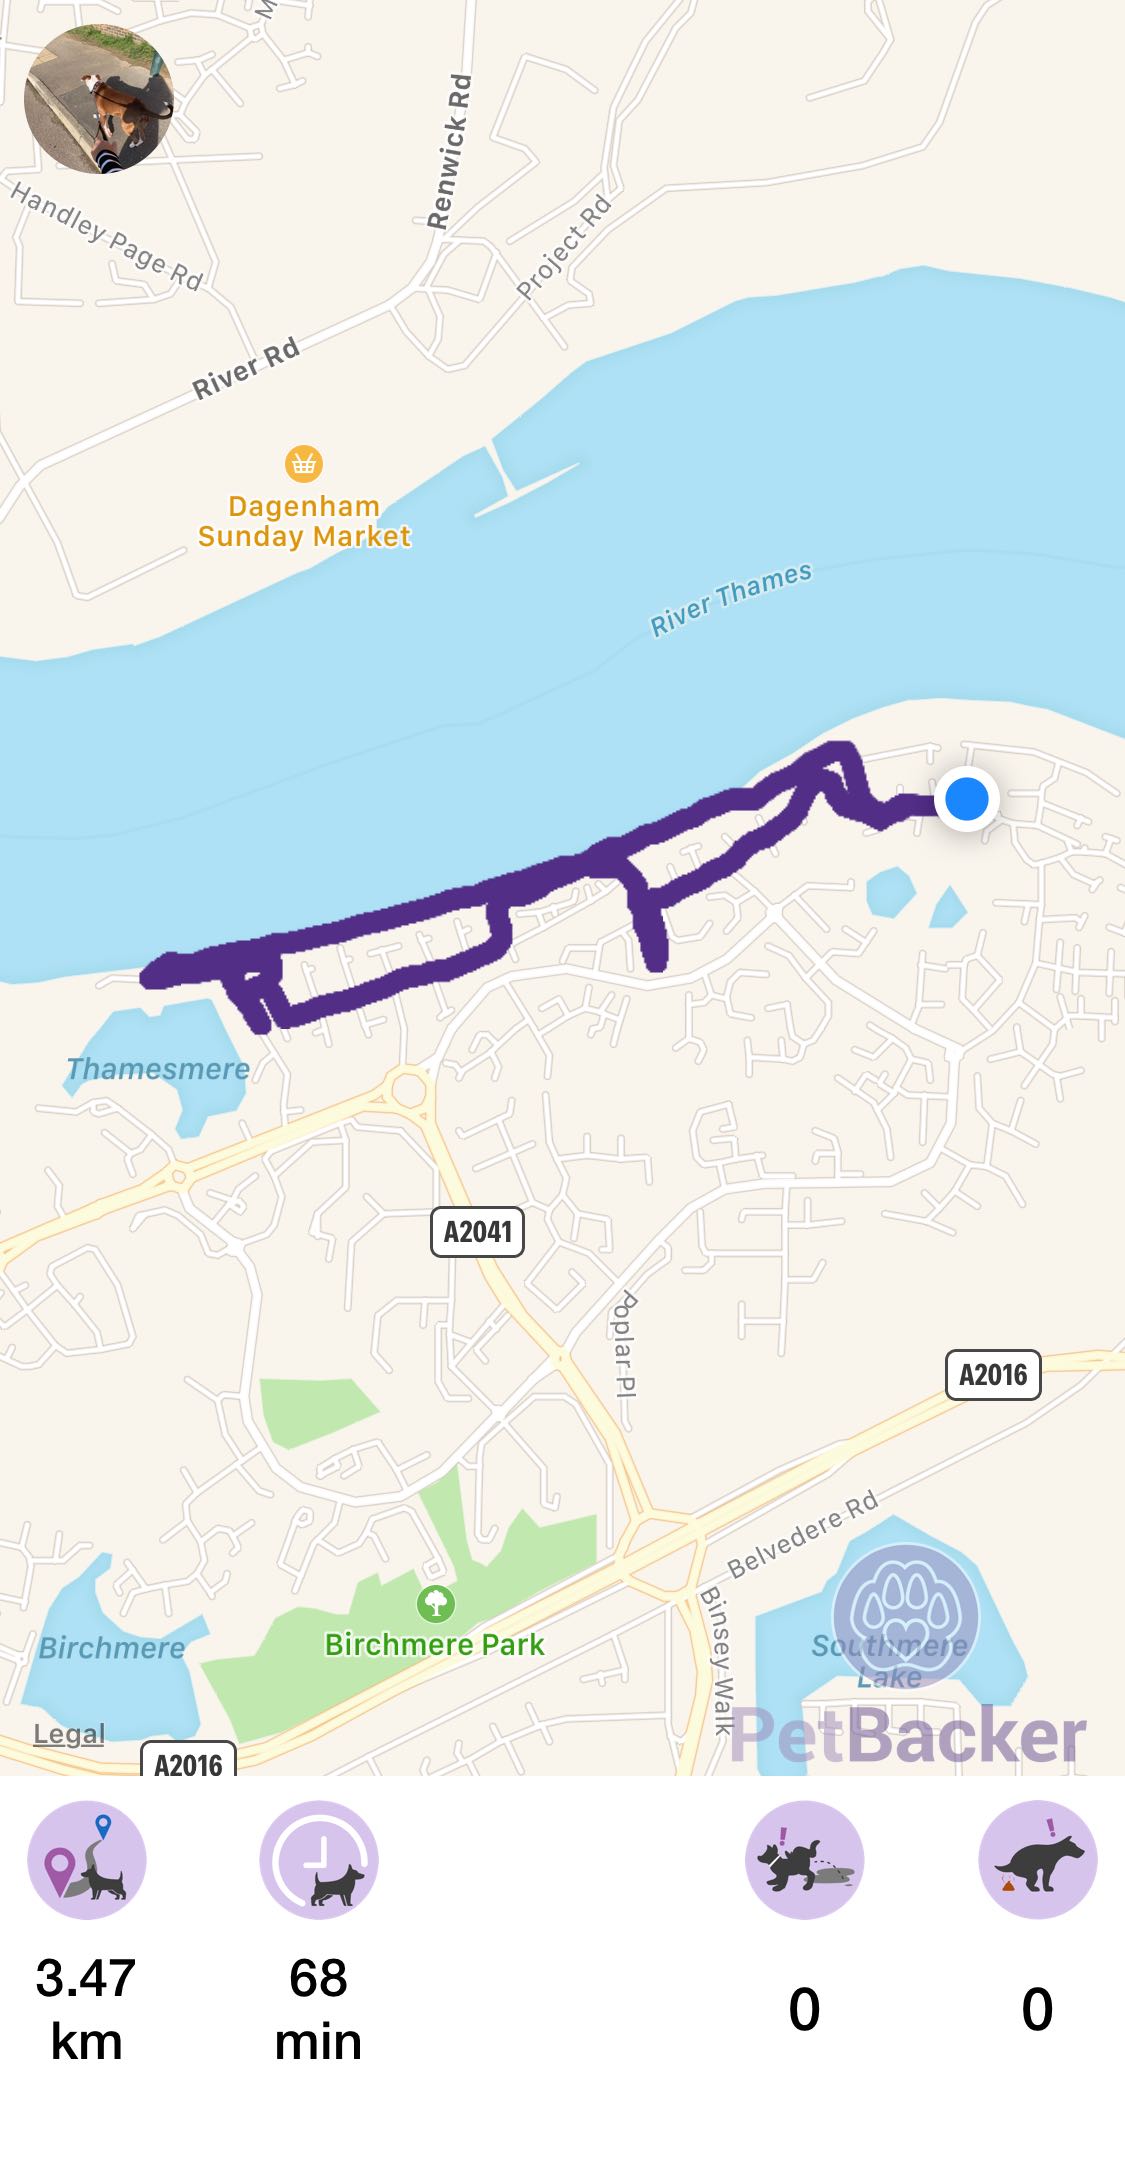 Just completed pet walking of 3.47 km